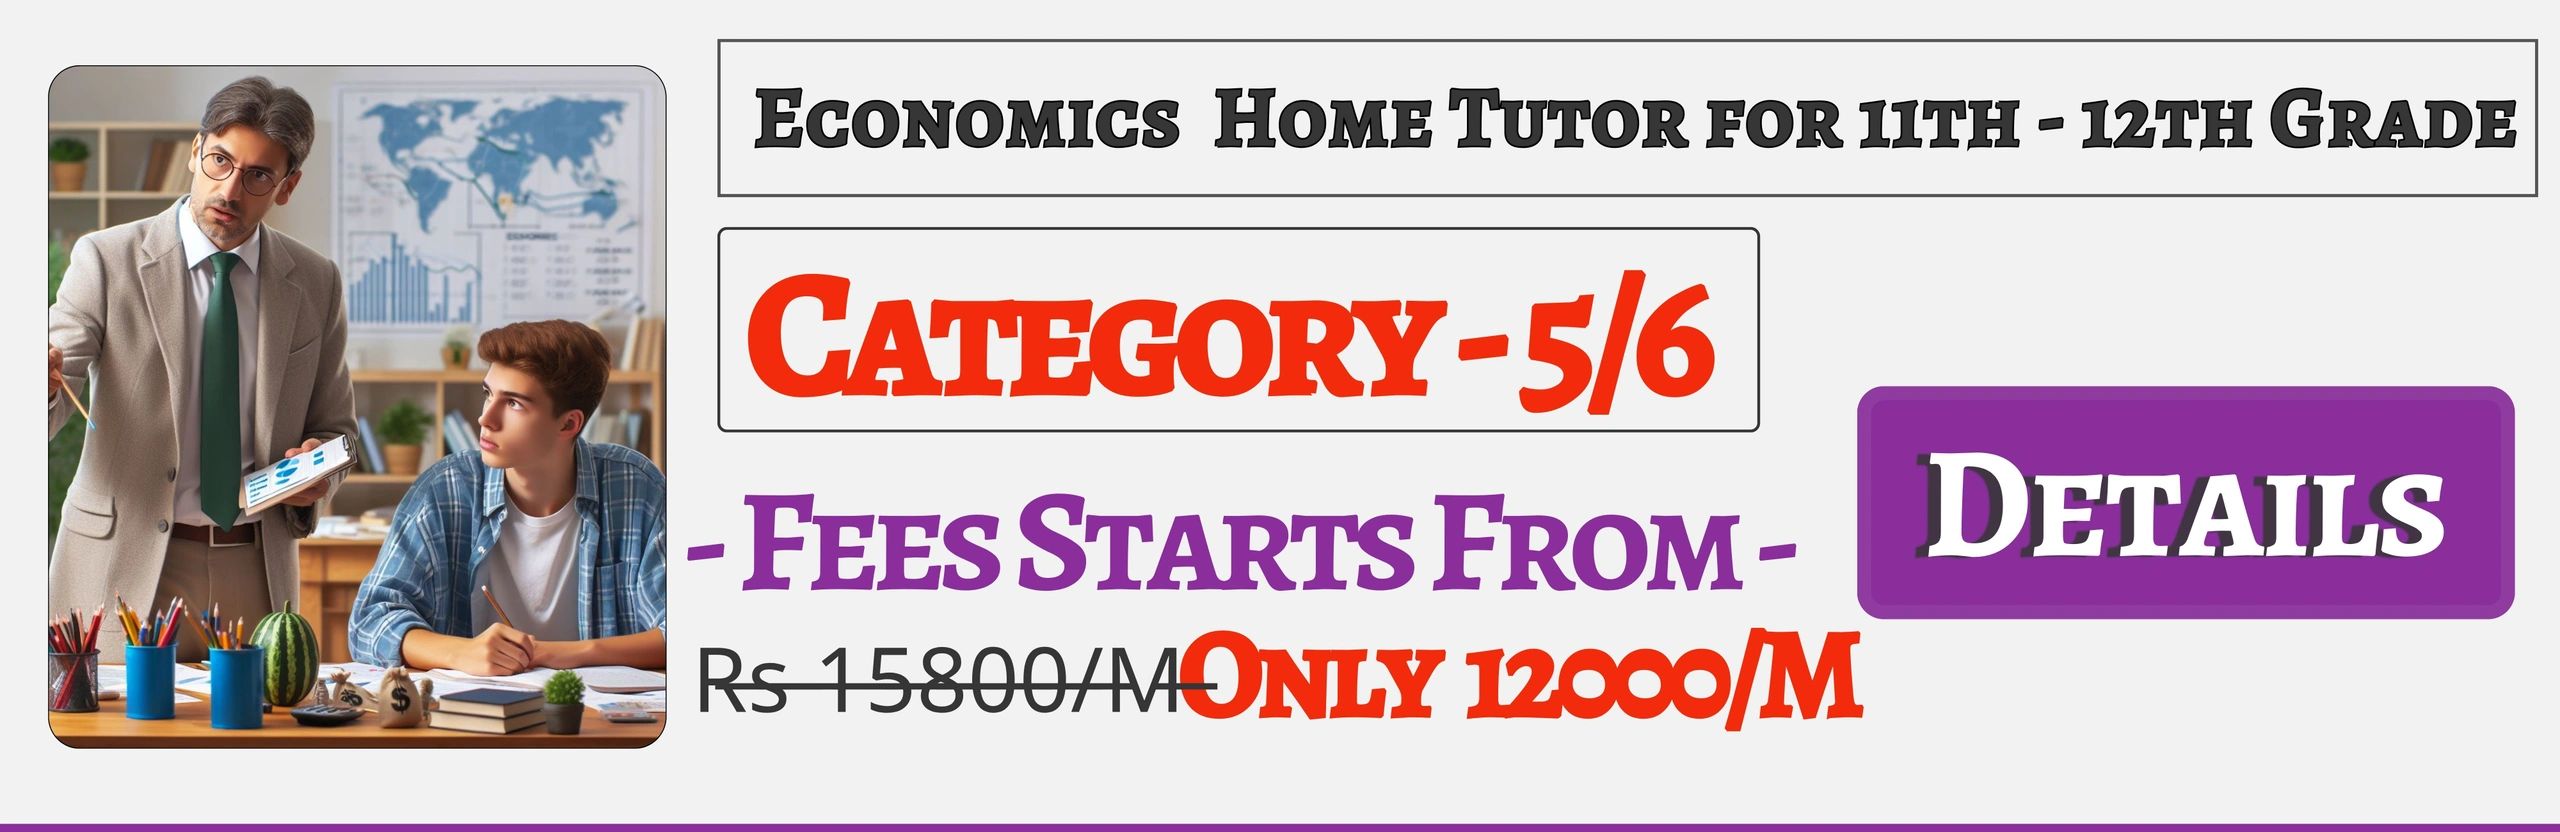 Book Best Nearby Economics Home Tuition Tutors For 11th & 12th Jaipur ,Fees Only 12000/M